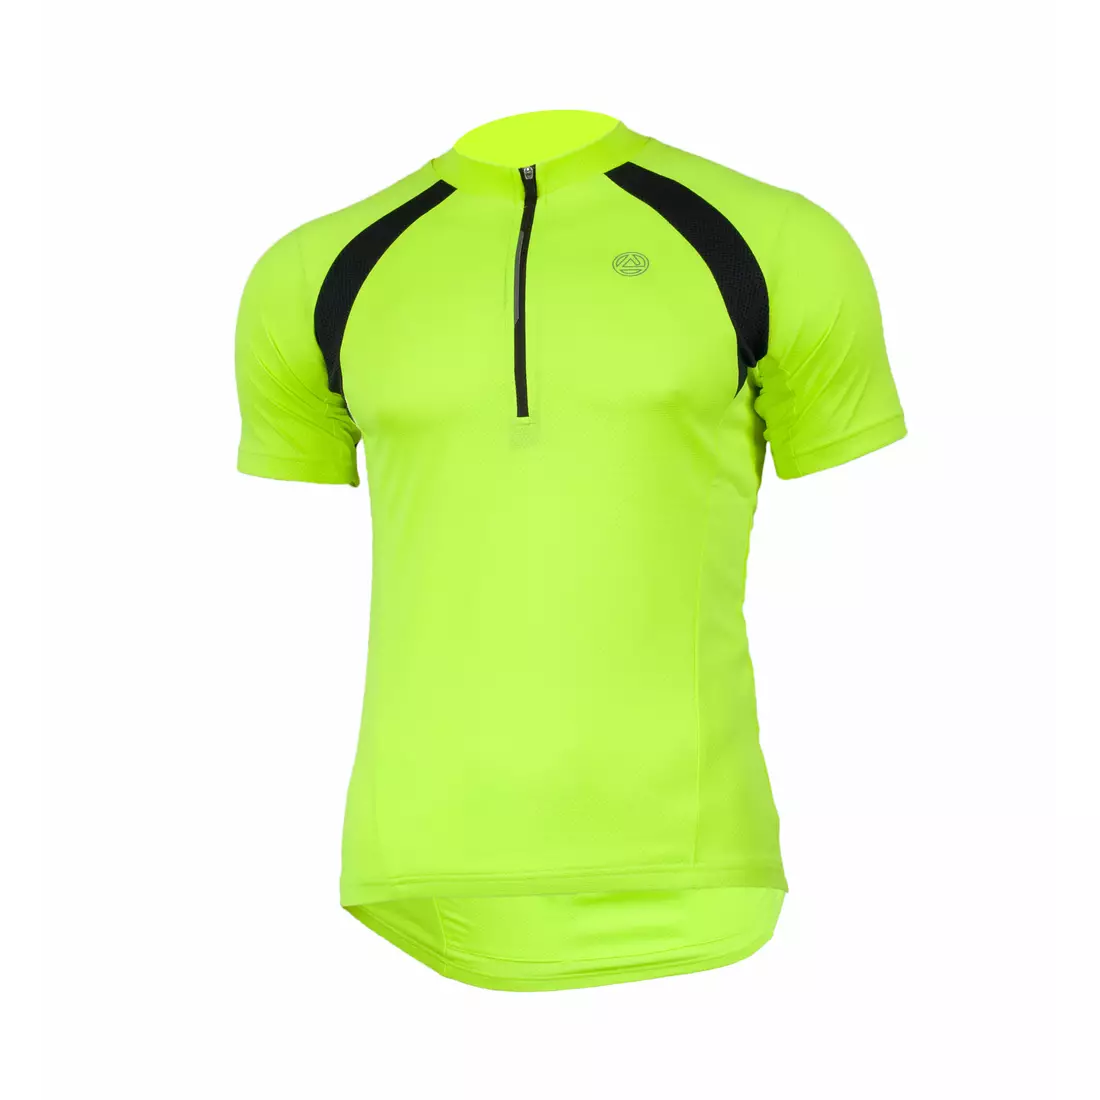 DARE2B MAGNETIZE - men's cycling jersey, DMT109-0M0